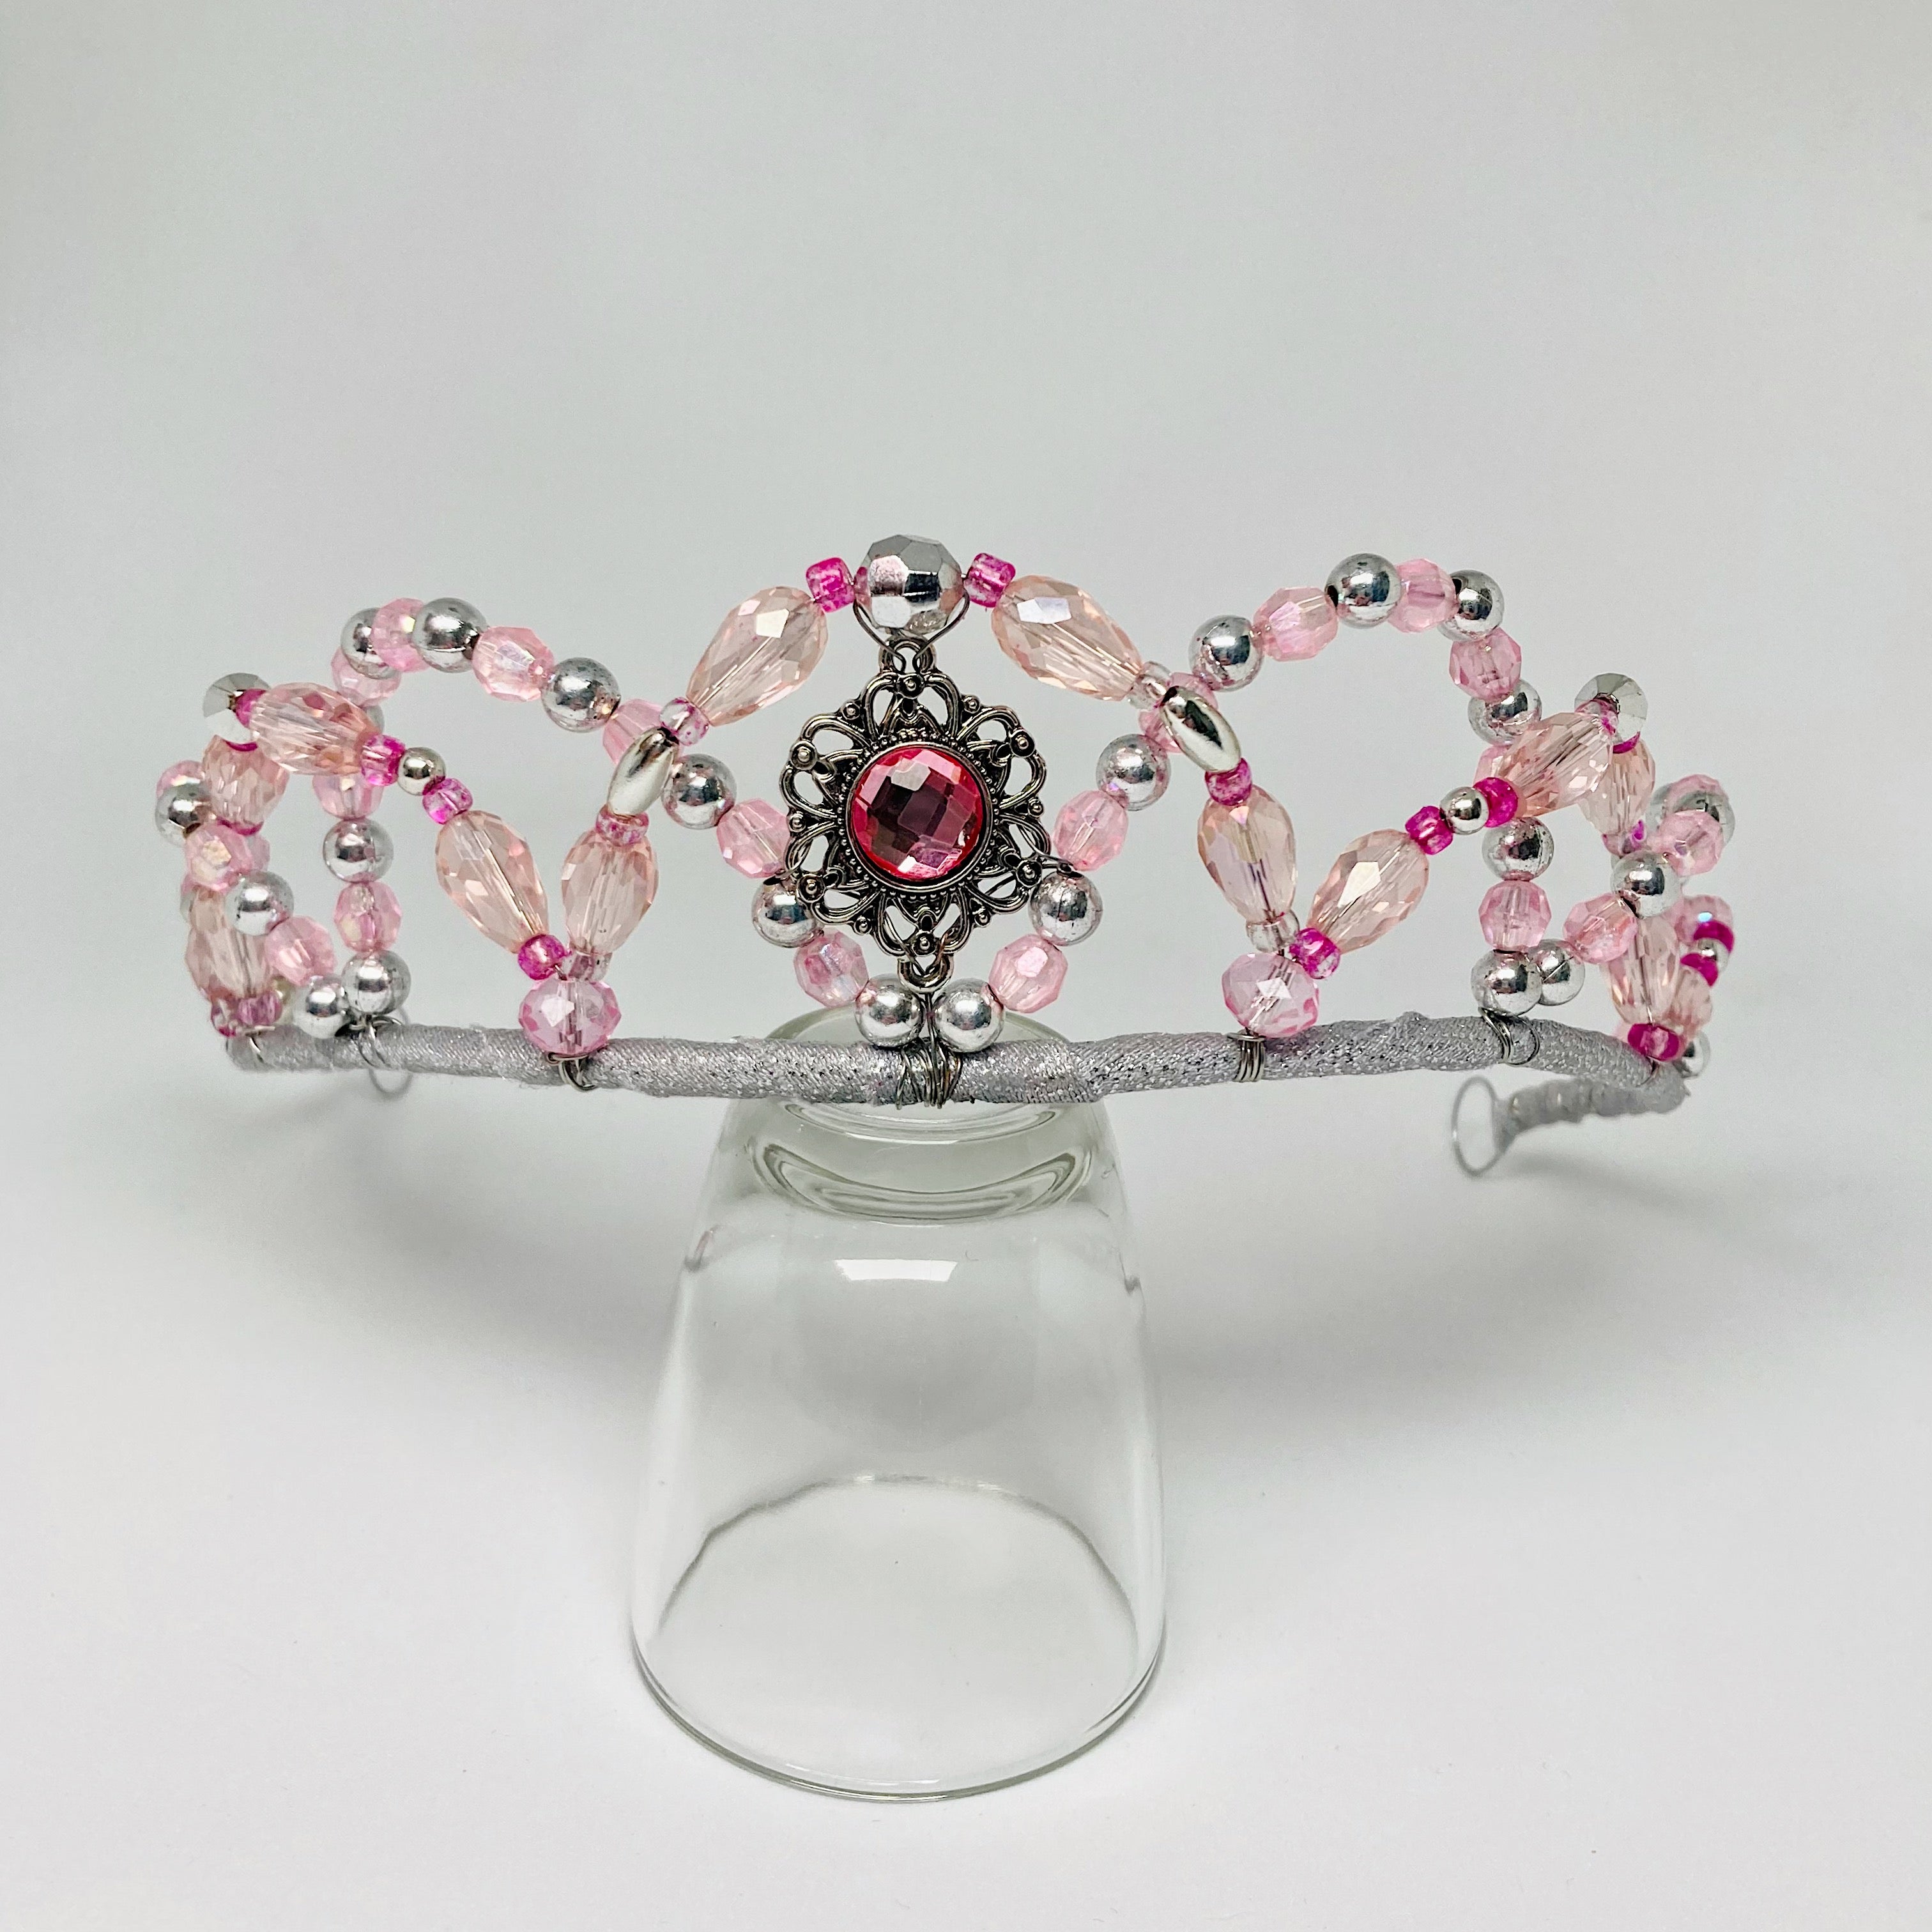 Front view of pink and silver beaded tiara with a central medallion displayed on a clear glass.